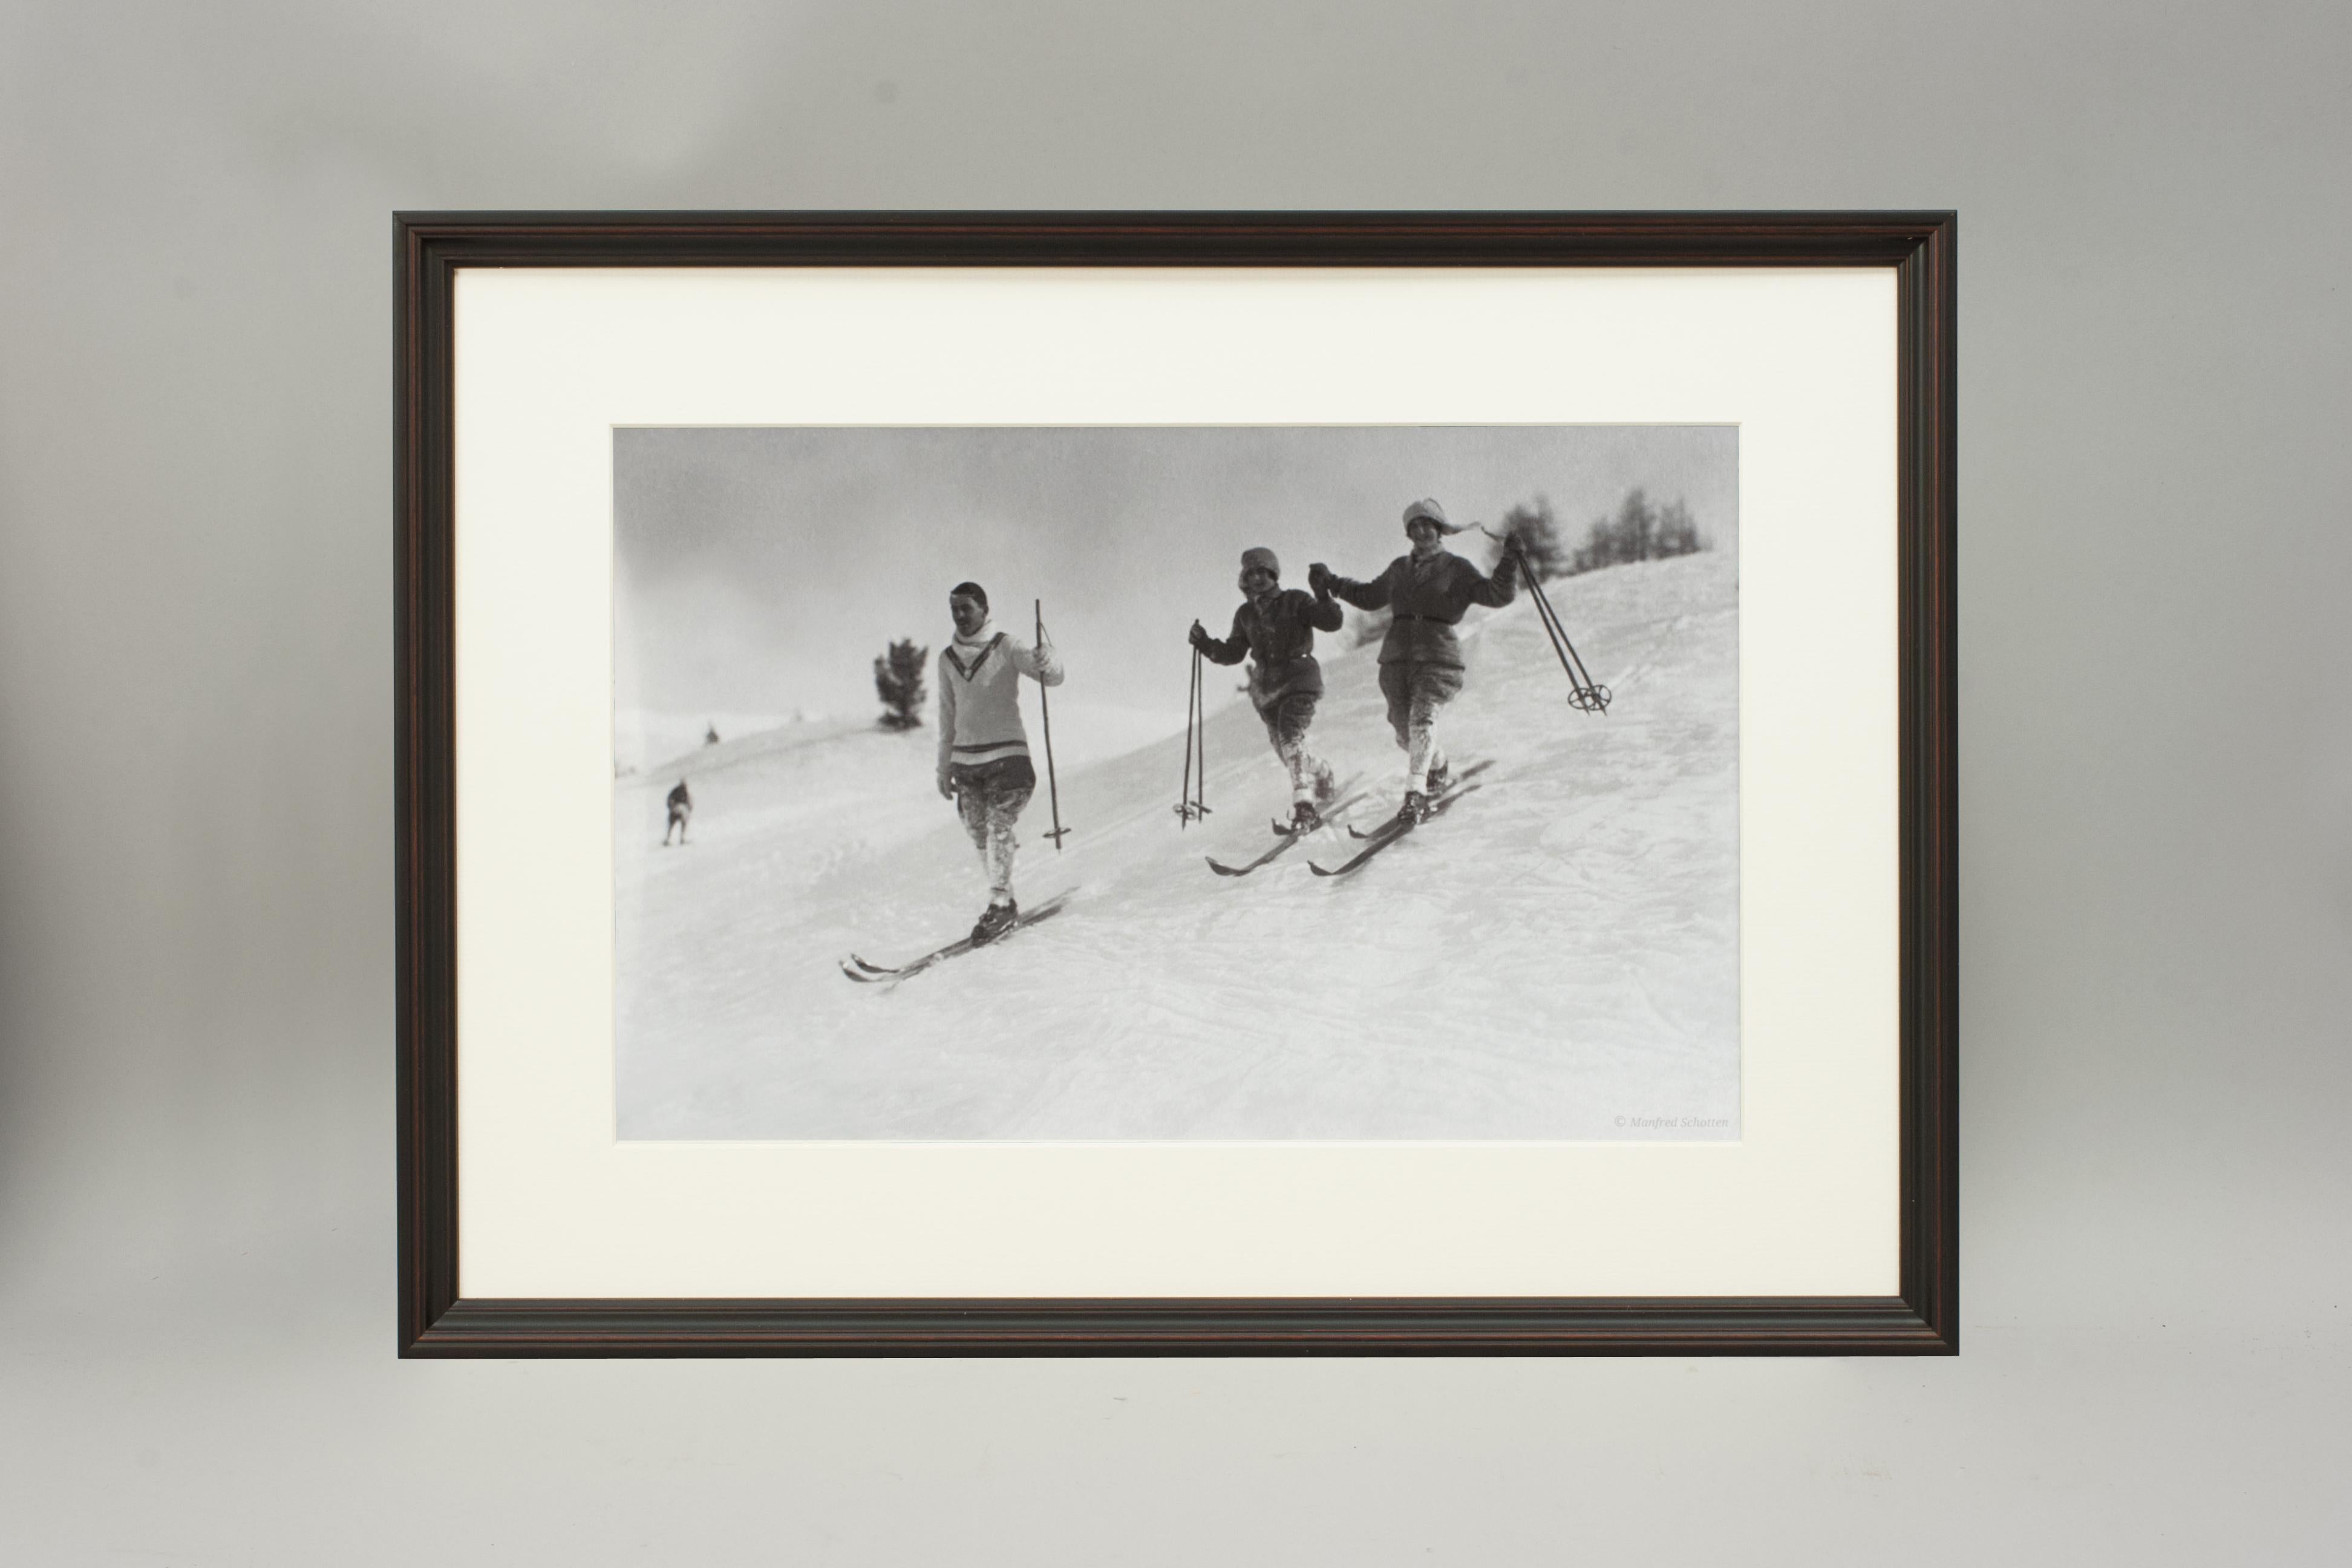 'St. MORITZ', a modern framed and mounted black and white photograph after an original 1930's skiing photograph. The frame is black with a burgundy undercoat, the glazing is clarity+ premium synthetic glass. Black & white alpine photos are the